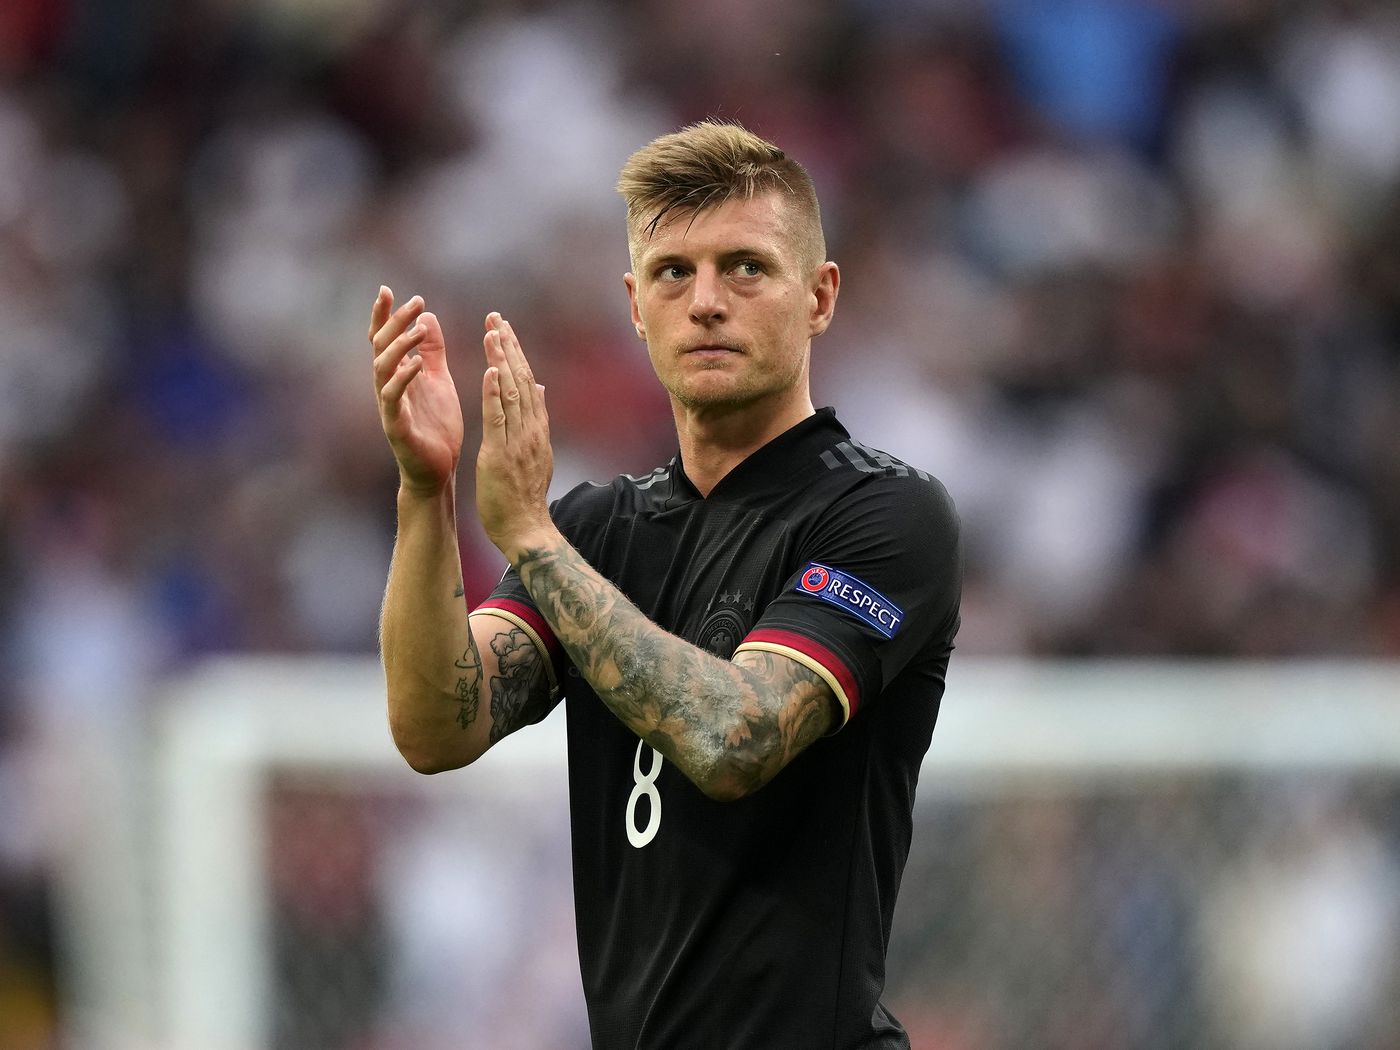 Toni Kroos Will Retire From German National Team